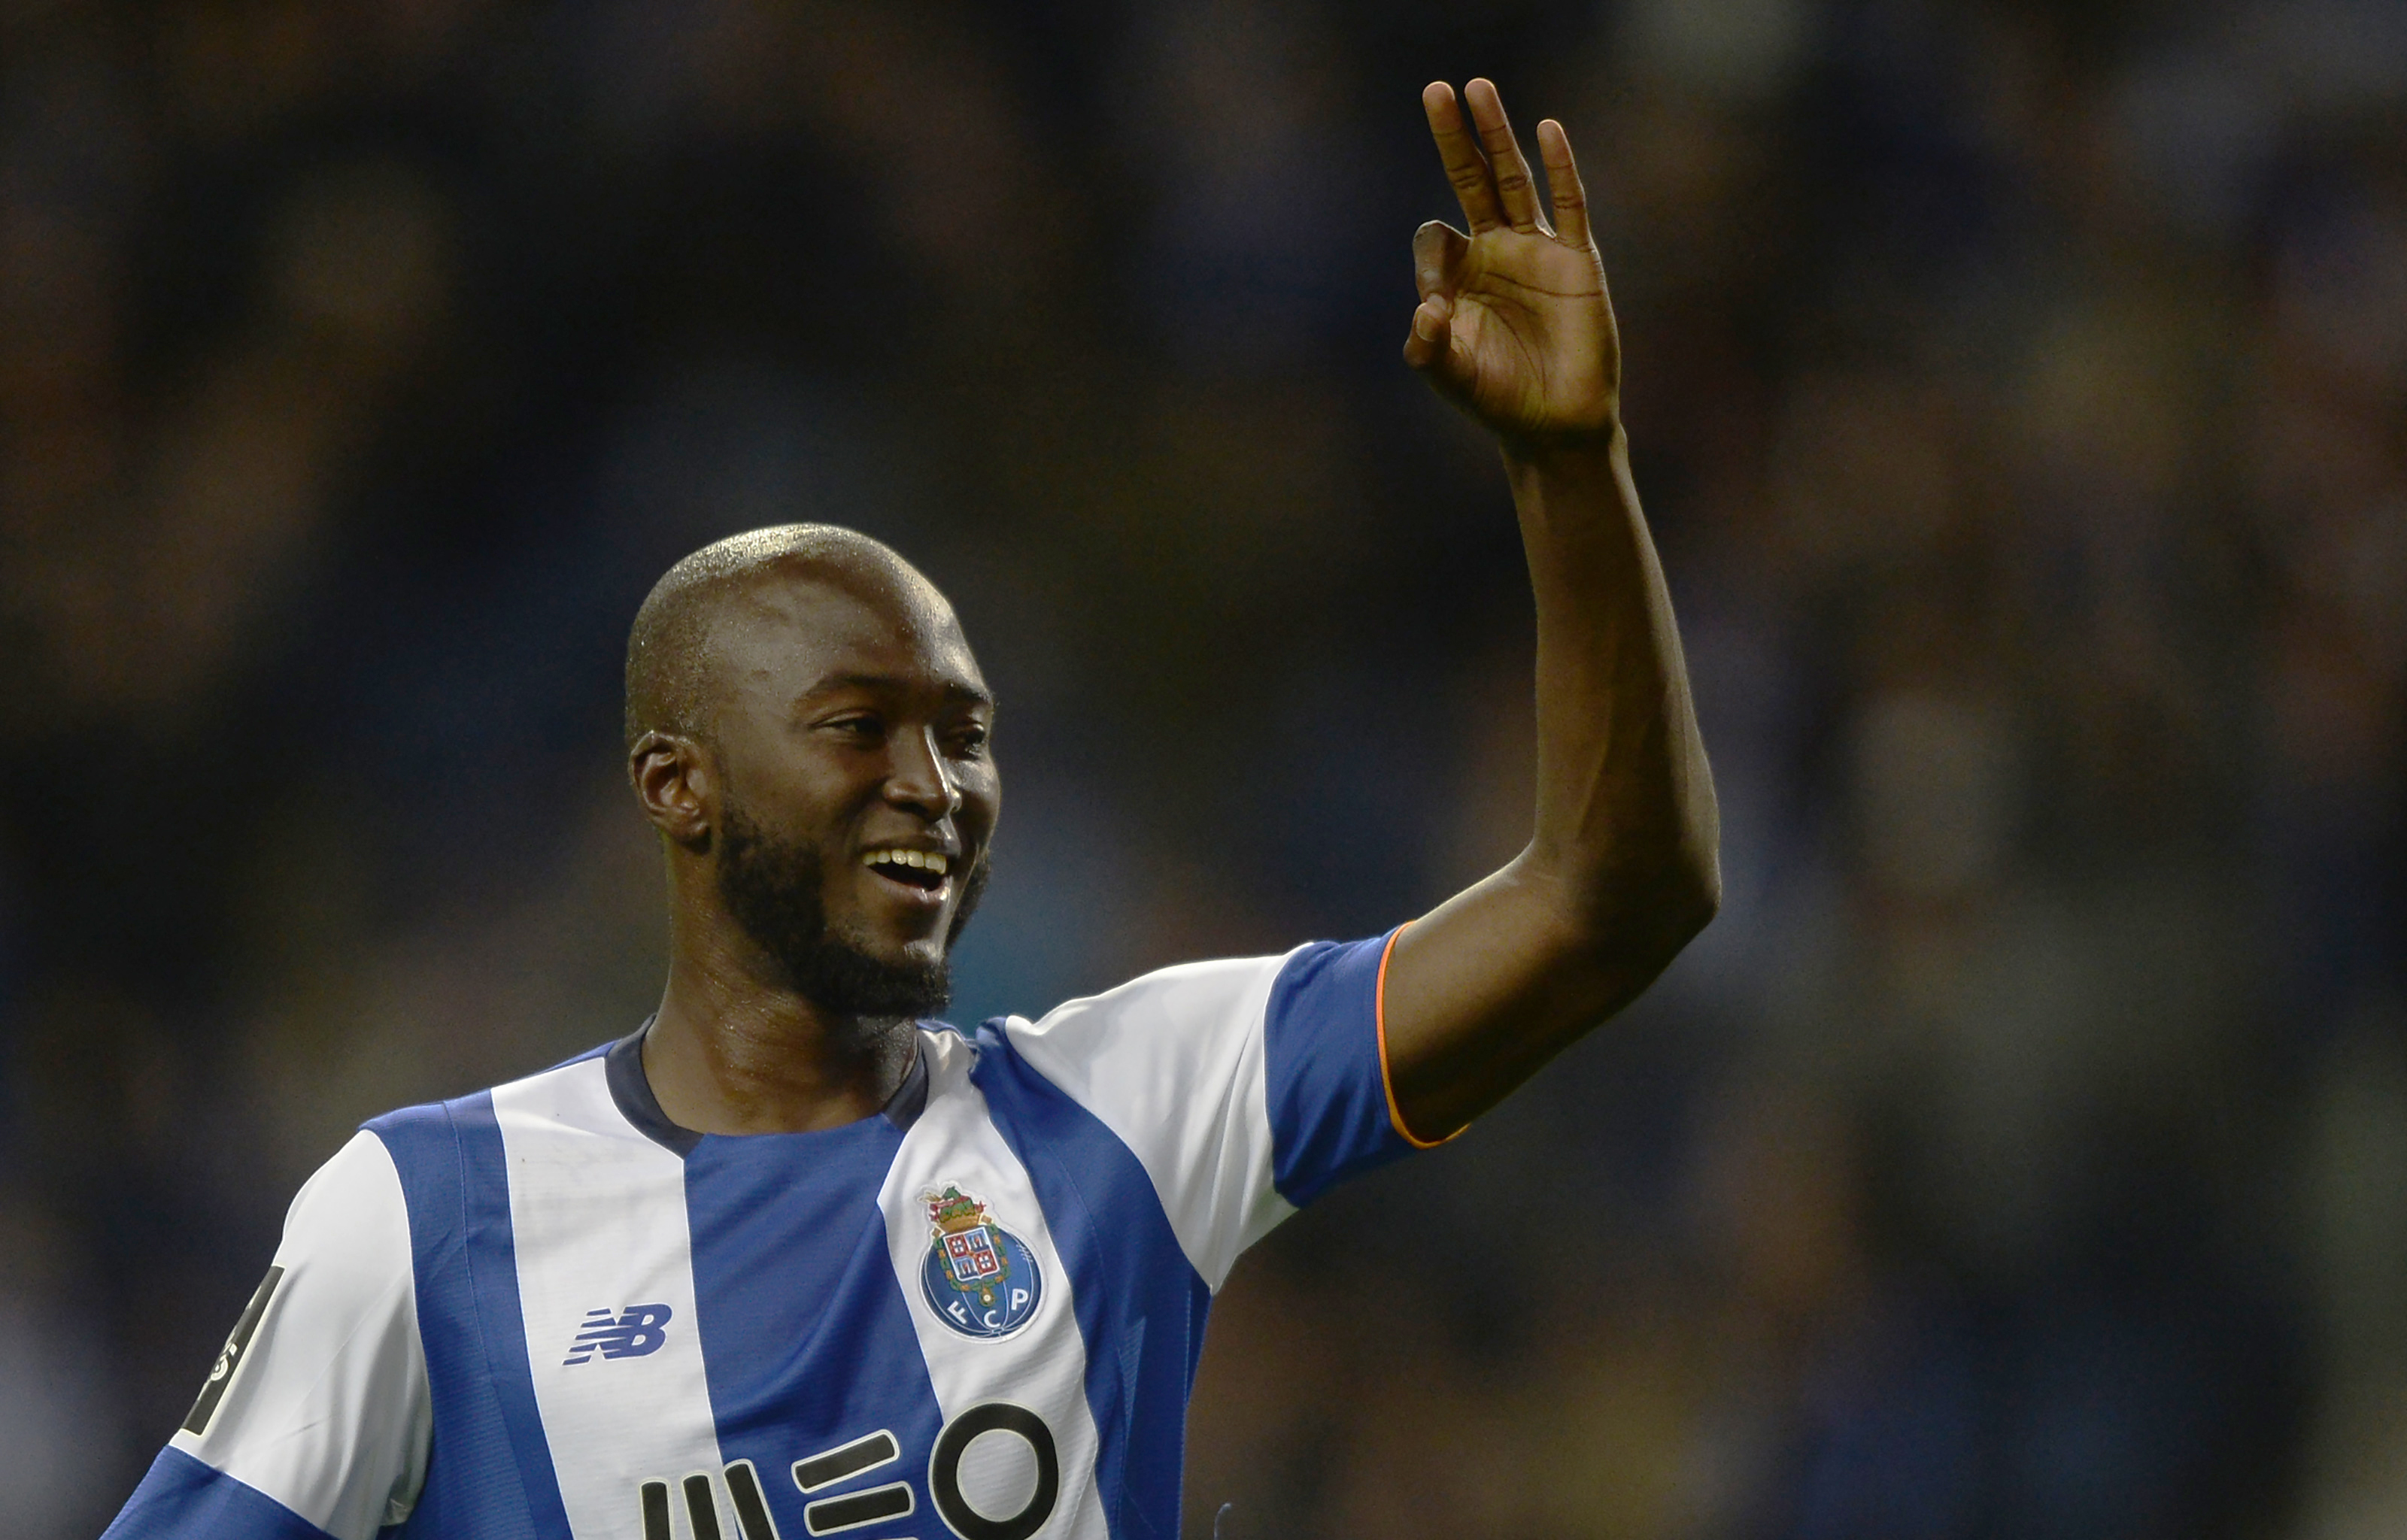 Porto's midfielder Danilo Pereira celebrates after scoring a goal during the Portuguese league football match FC Porto vs CD Nacional Funchal at the Dragao stadium in Porto on April 17, 2016. / AFP / MIGUEL RIOPA        (Photo credit should read MIGUEL RIOPA/AFP/Getty Images)